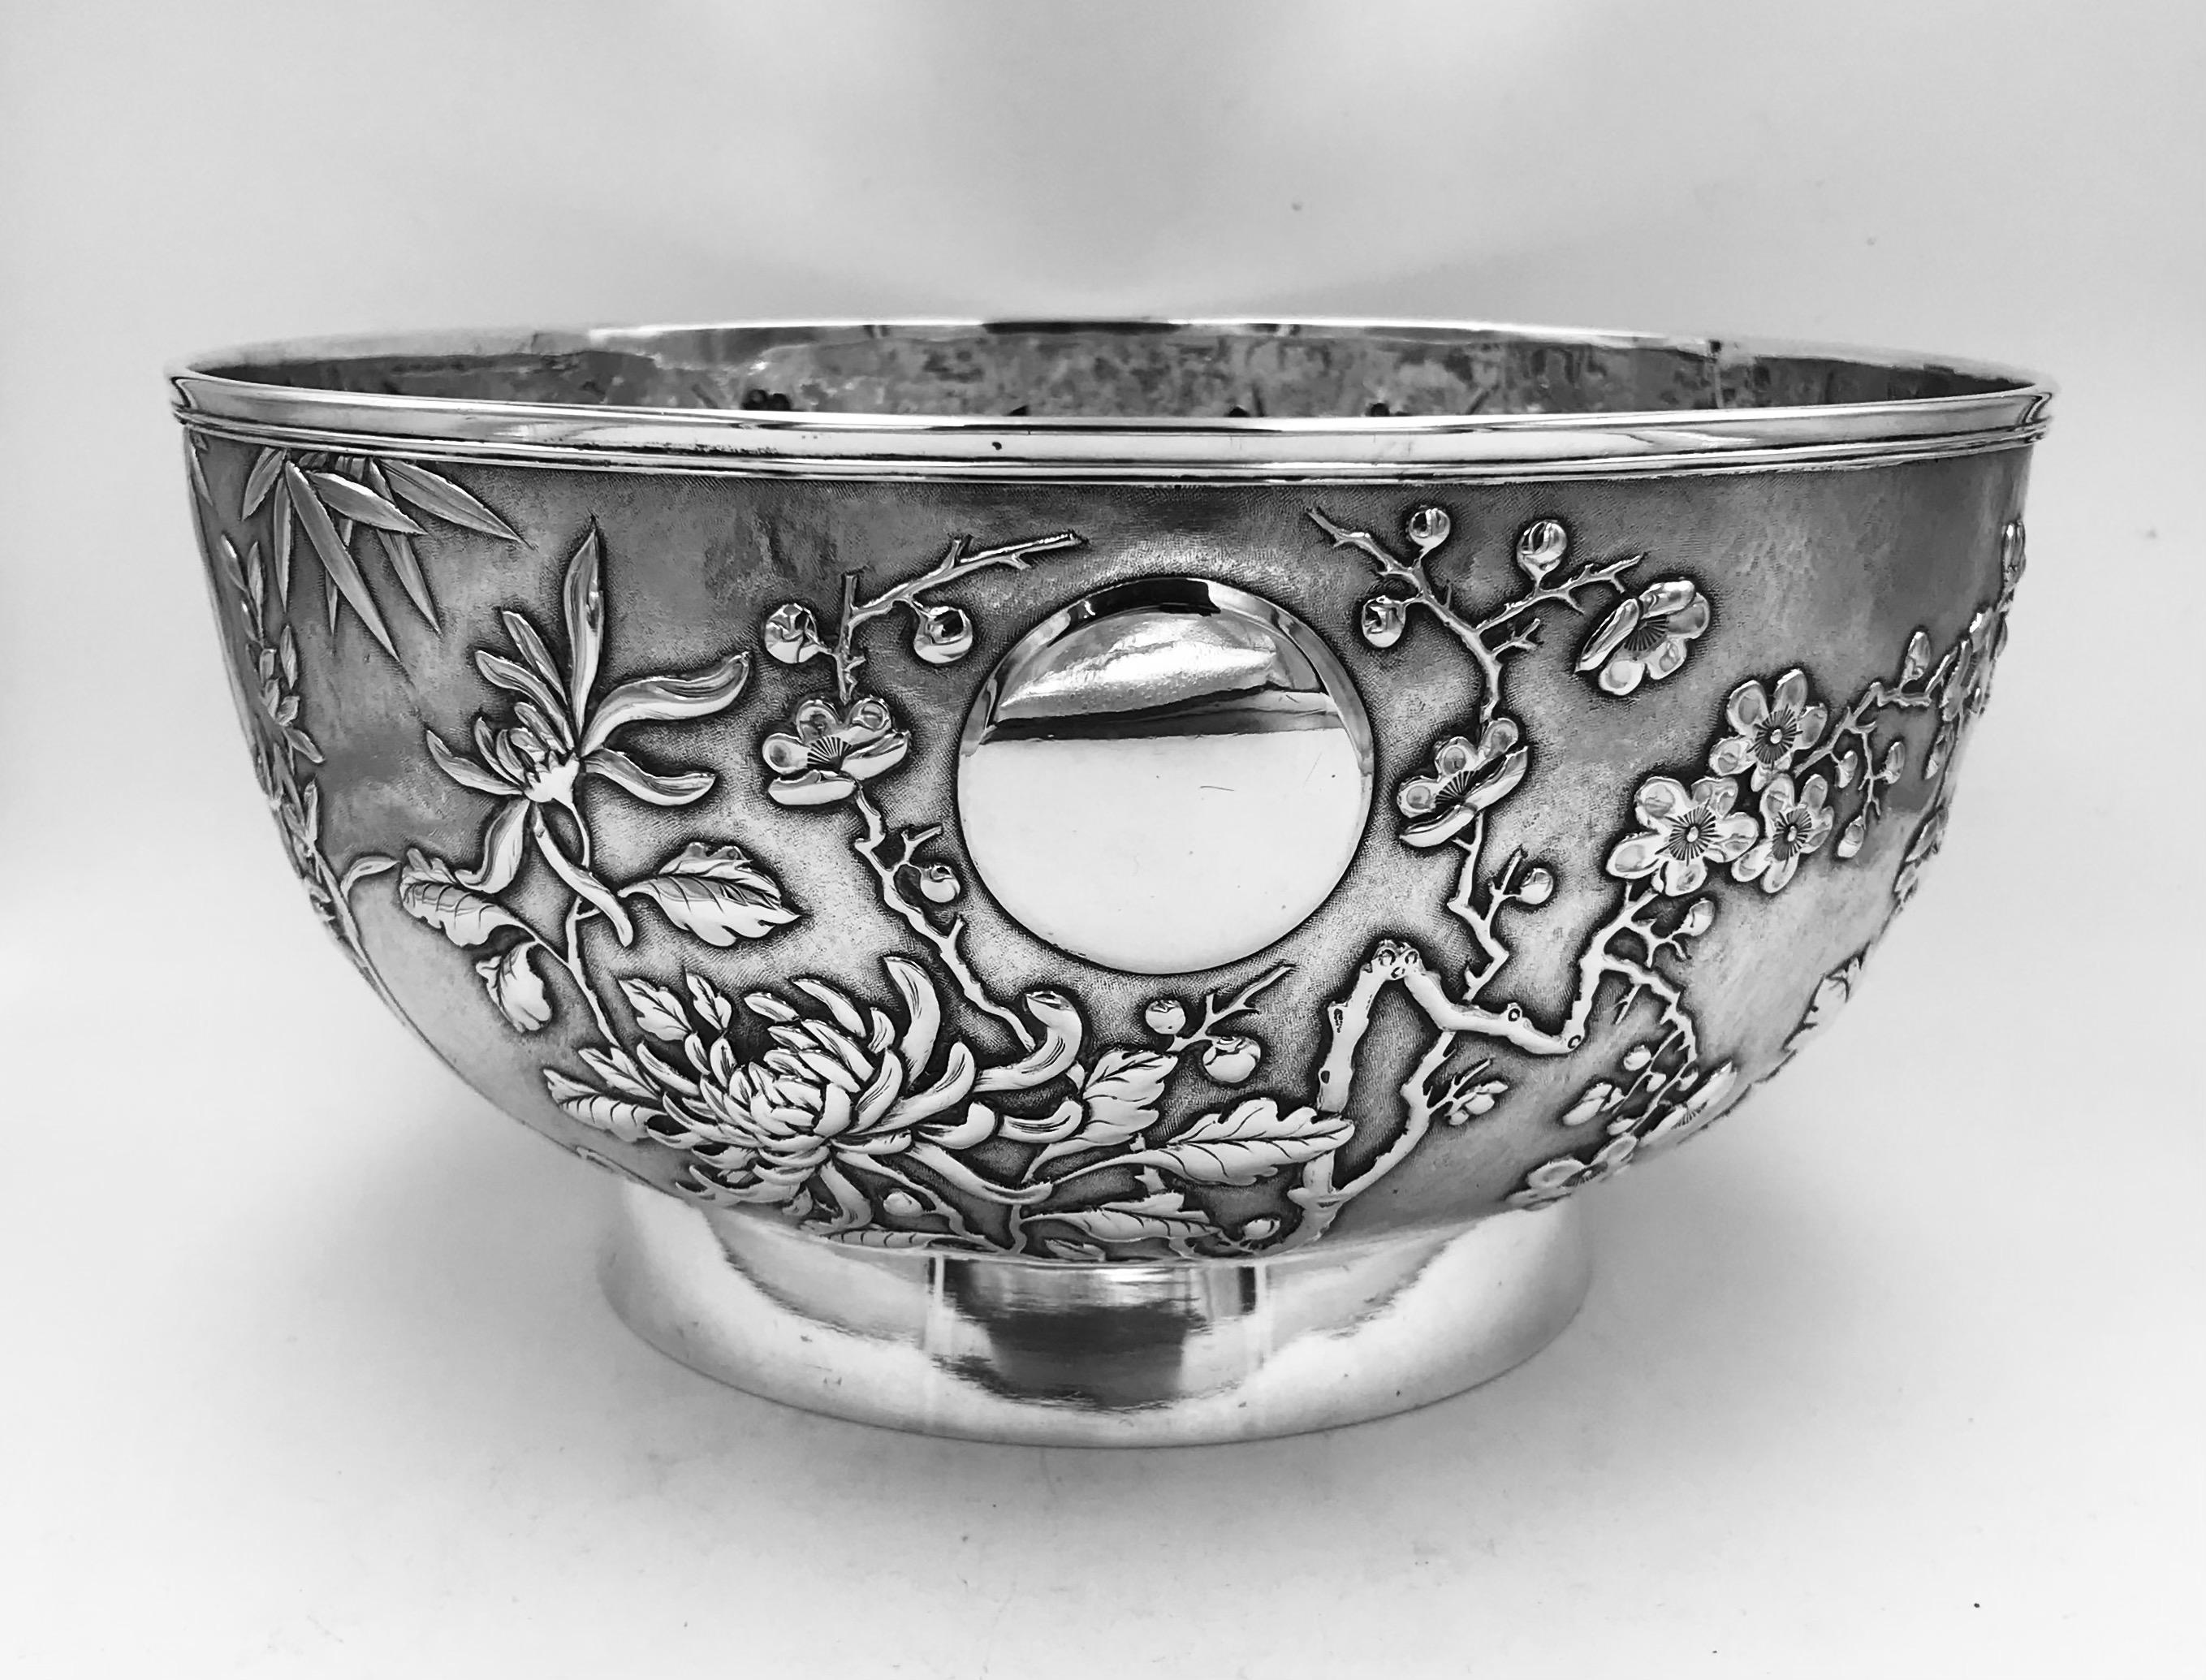 Chinese Export Silver Bowl, profusely decorated with chrysanthemum, prunus, iris, and bamboo, and with a vacant circular cartouche. The bowl dates from circa 1895 and is in very good, crisp condition. It was made by Shao '绍记’ (ShaoJi), and retailed